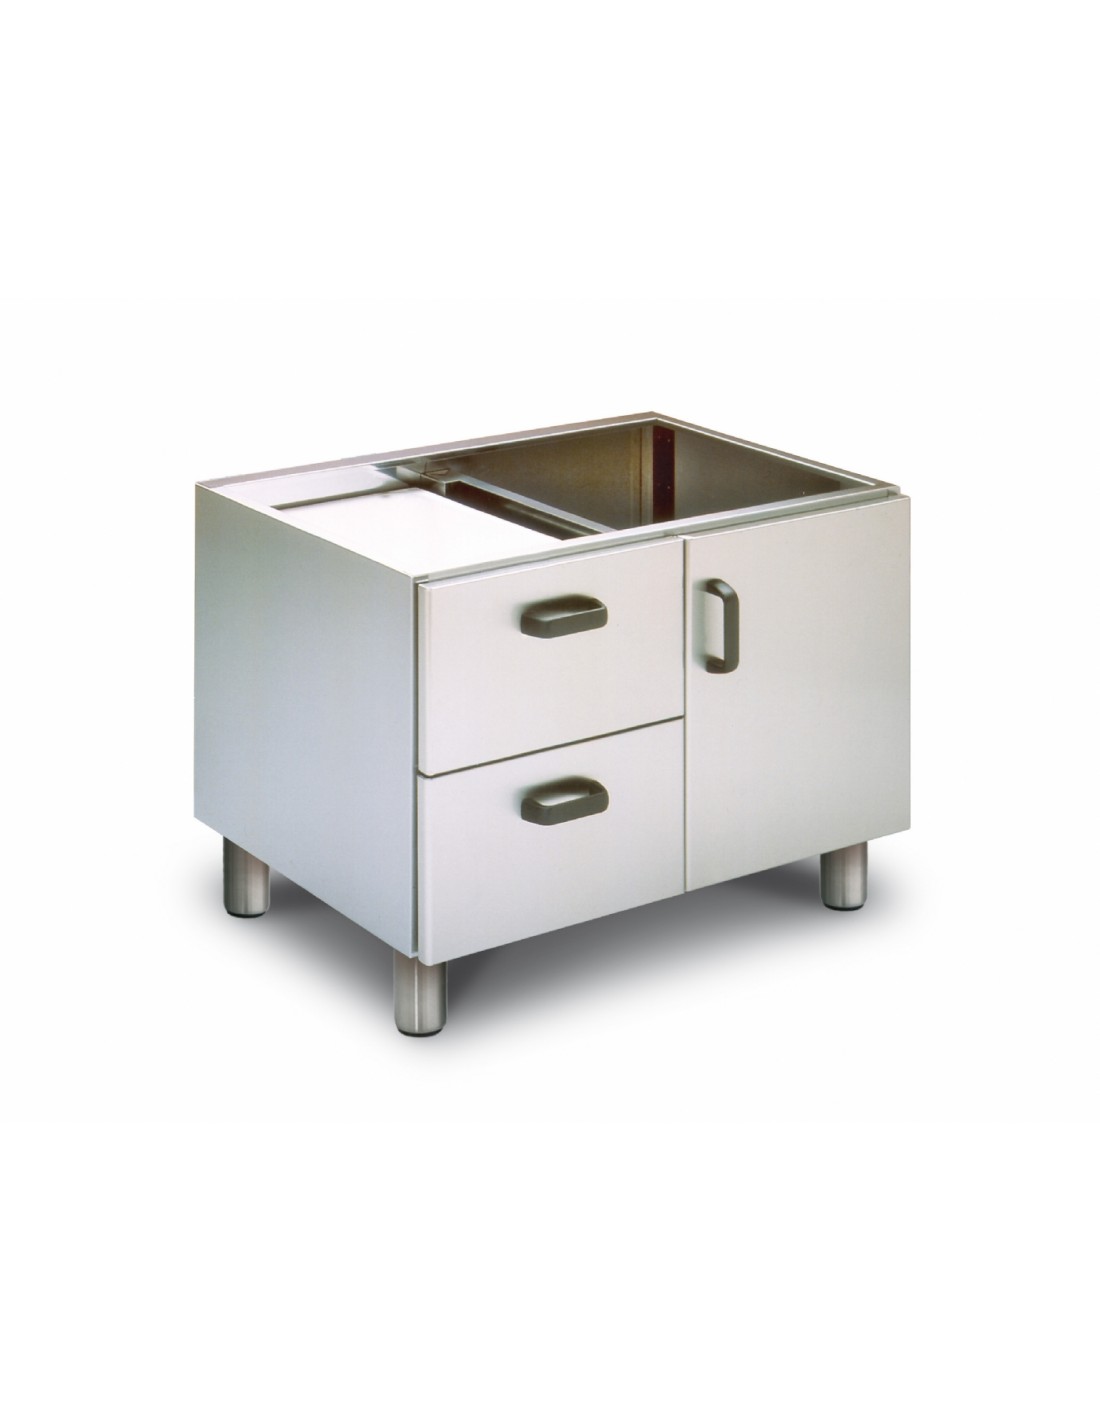 Base with drawers and door - N. 2 drawers with n. 2 GN 1/1 plastic containers - Dimensions 80 x 56.5 x 58 h cm